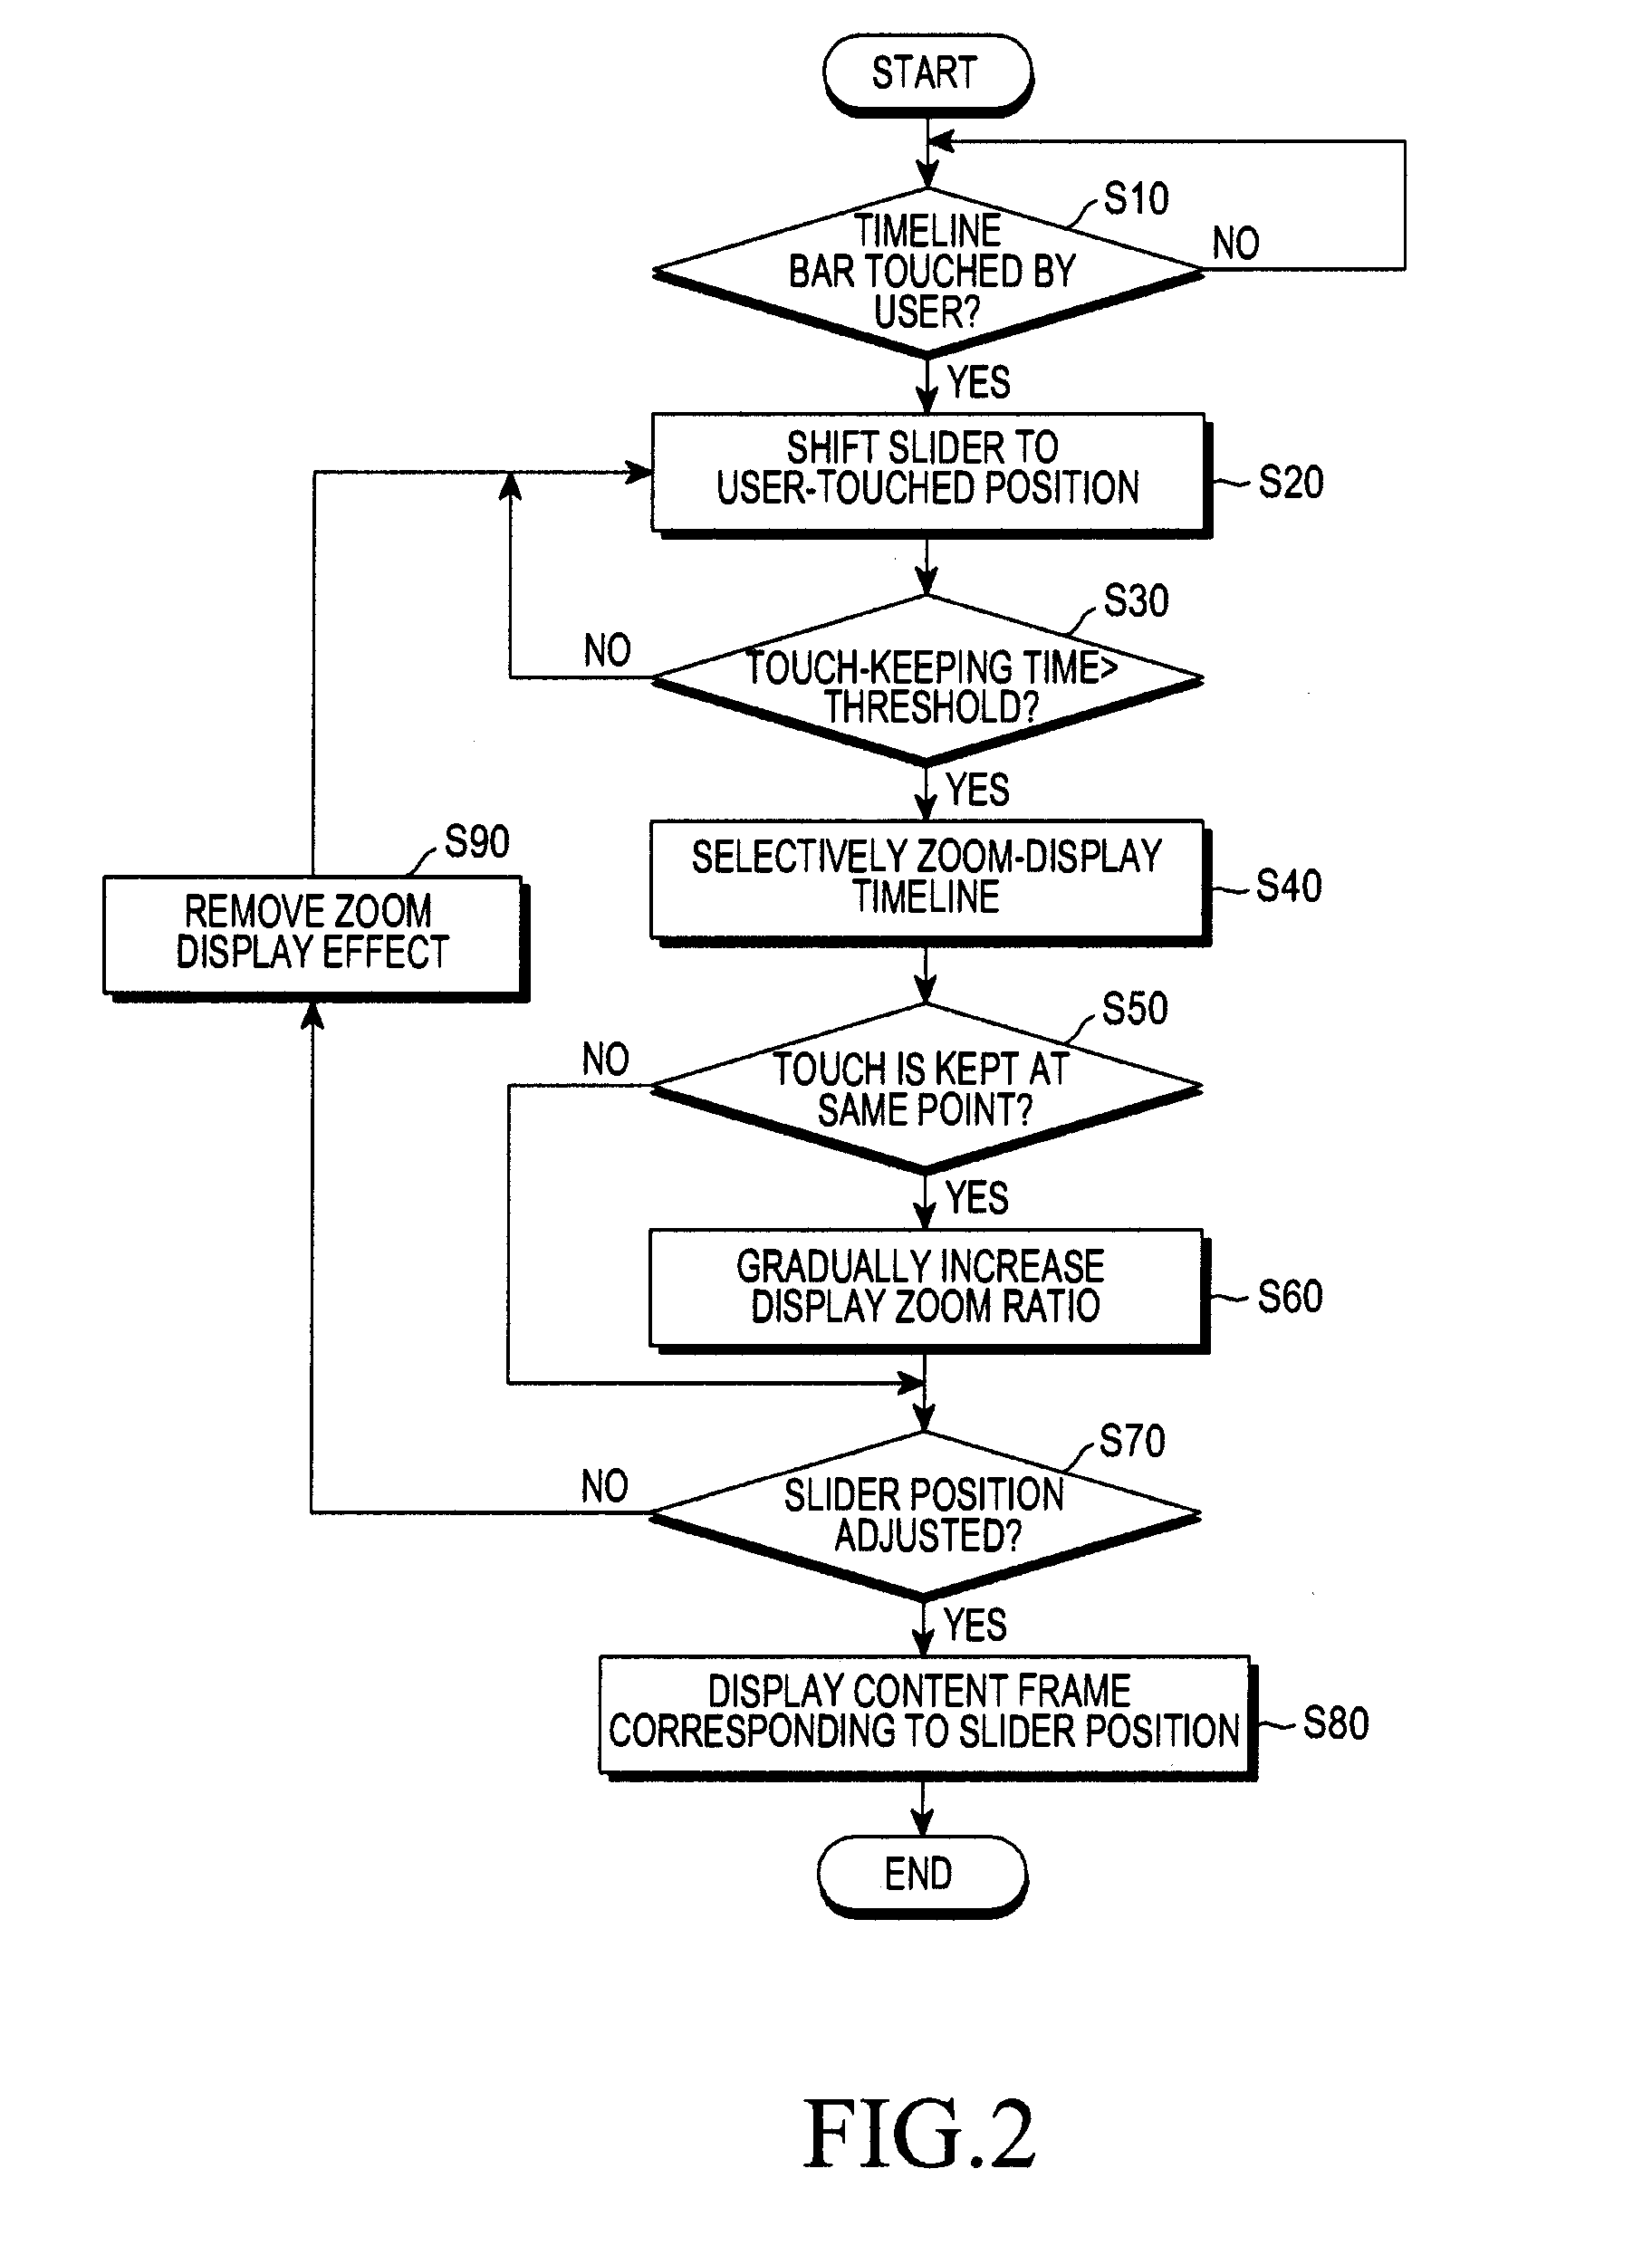 Method and apparatus for controlling a display of multimedia content using a timeline-based interface